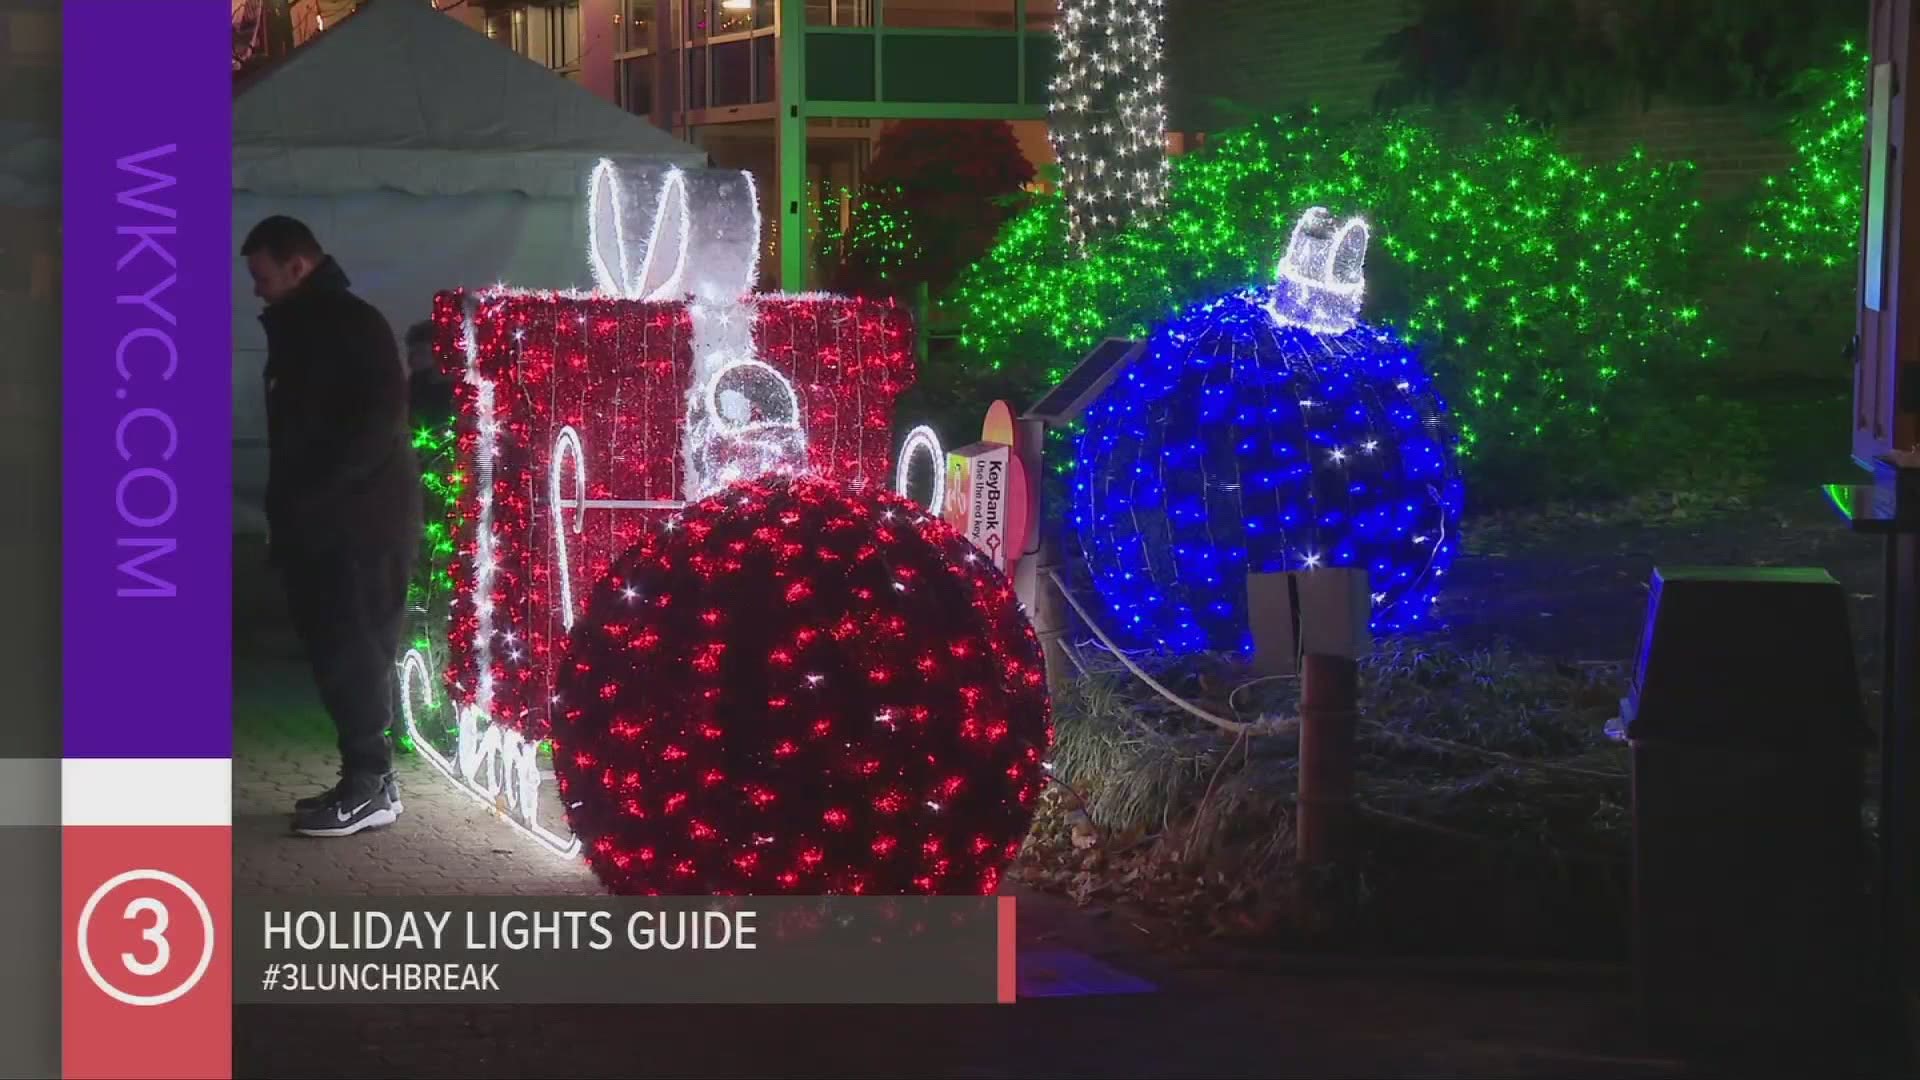 Are you in the holiday spirit? Here are a few spots you can check out some amazingly cool holiday lights as the season officially kicks off this weekend.